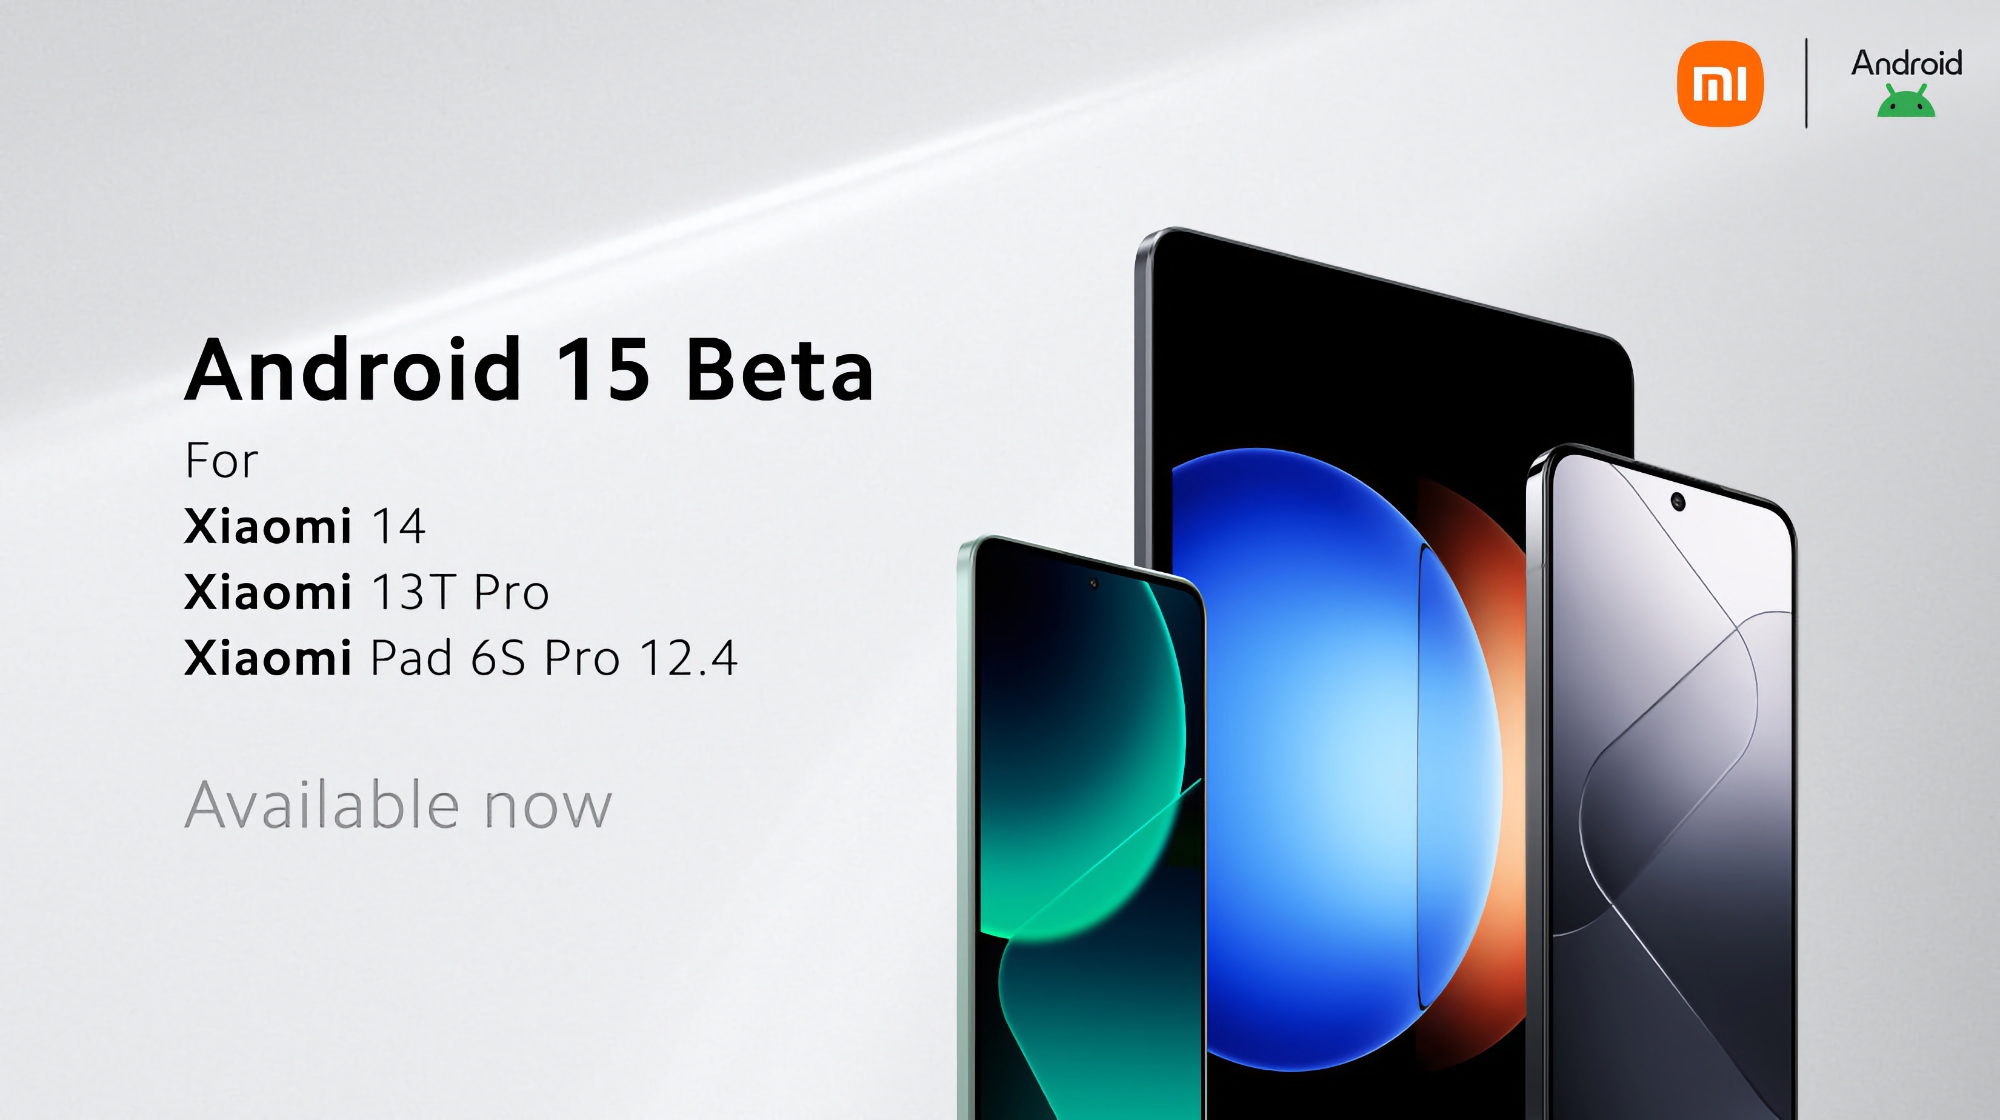 Xiaomi 14, Xiaomi 13T Pro and Xiaomi Pad 6S Pro have received the beta version of Android 15